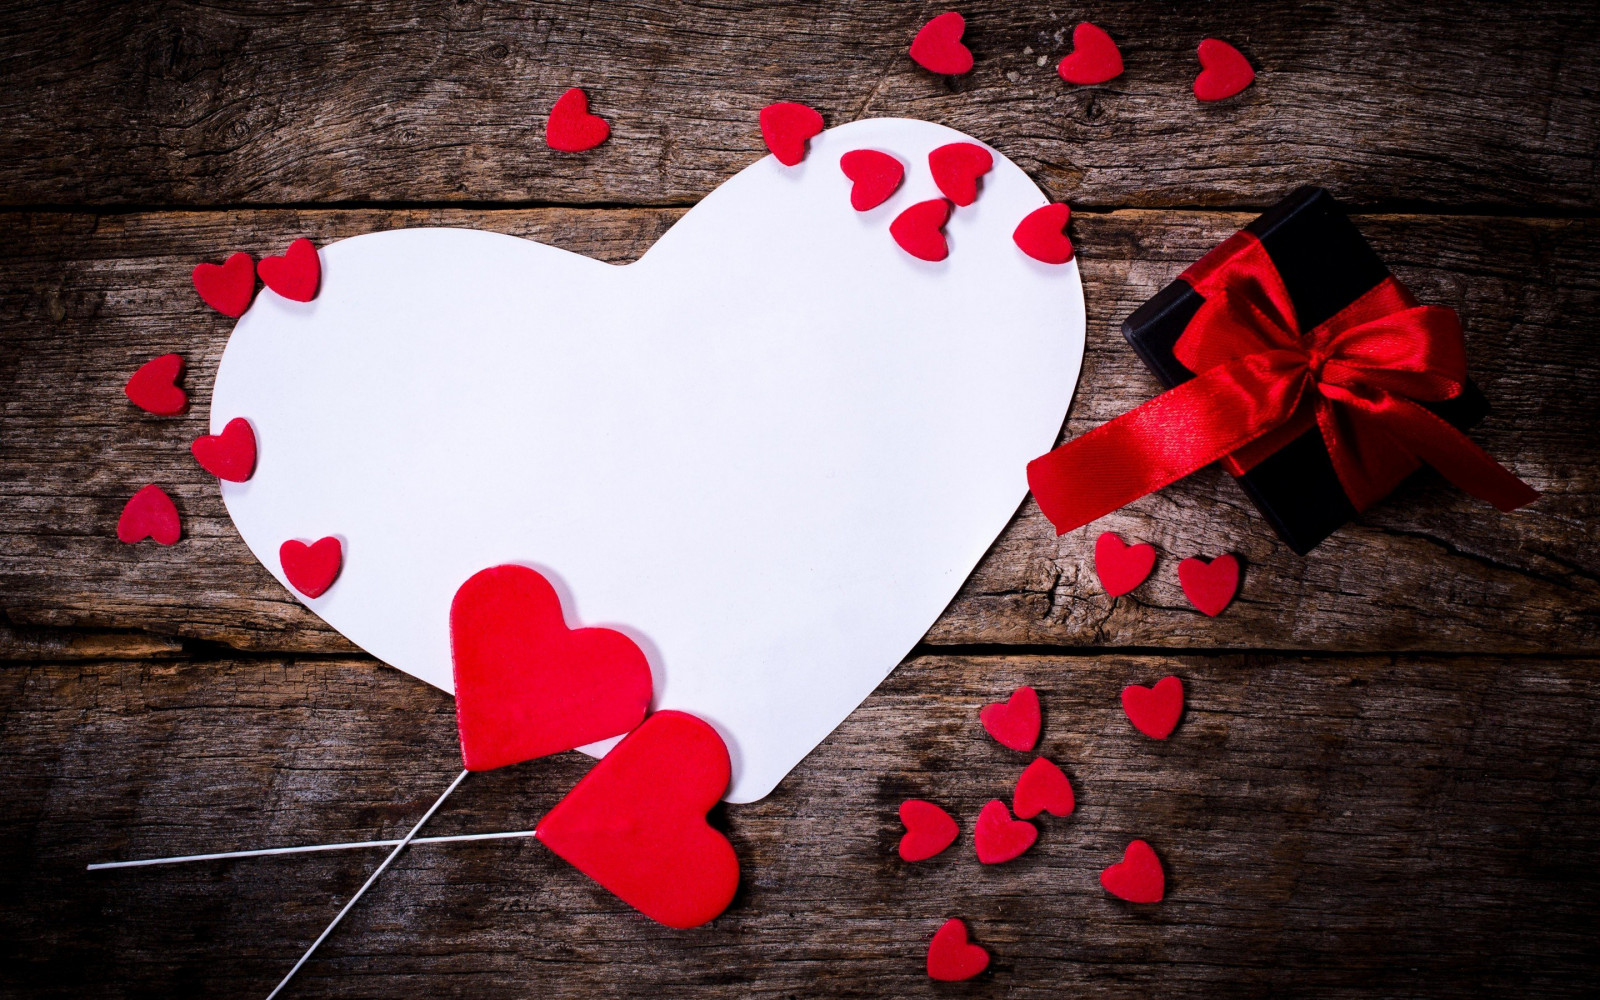 Wallpaper, 2880x1800 px, a, background, black, box, colorfull, day, gift, heart, hearts, holiday, lot, love, of, red, romance, Valentine, Valentineand039s, white, wooden 2880x1800